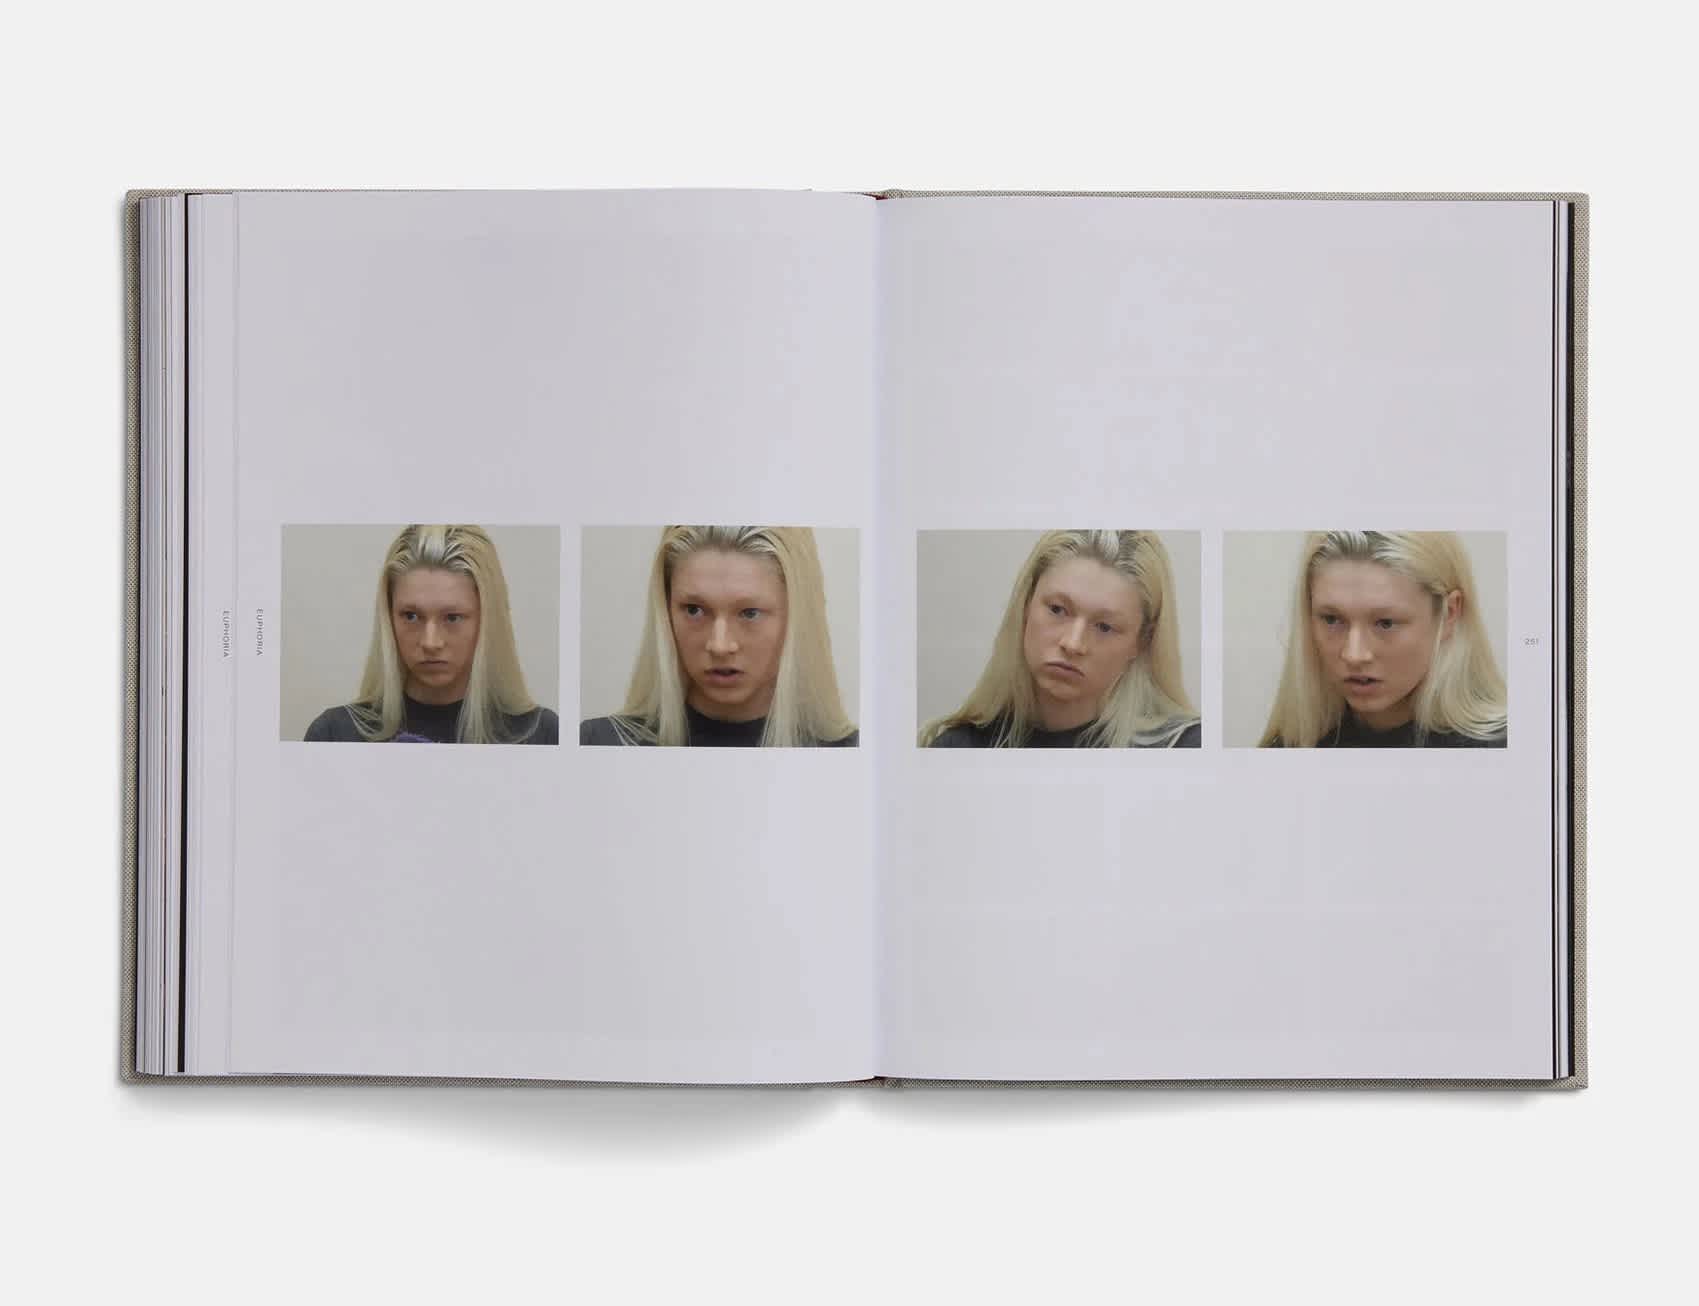 Book interior with four images of the actress Hunter Schafer spread across two pages. The images are still from a screen test.